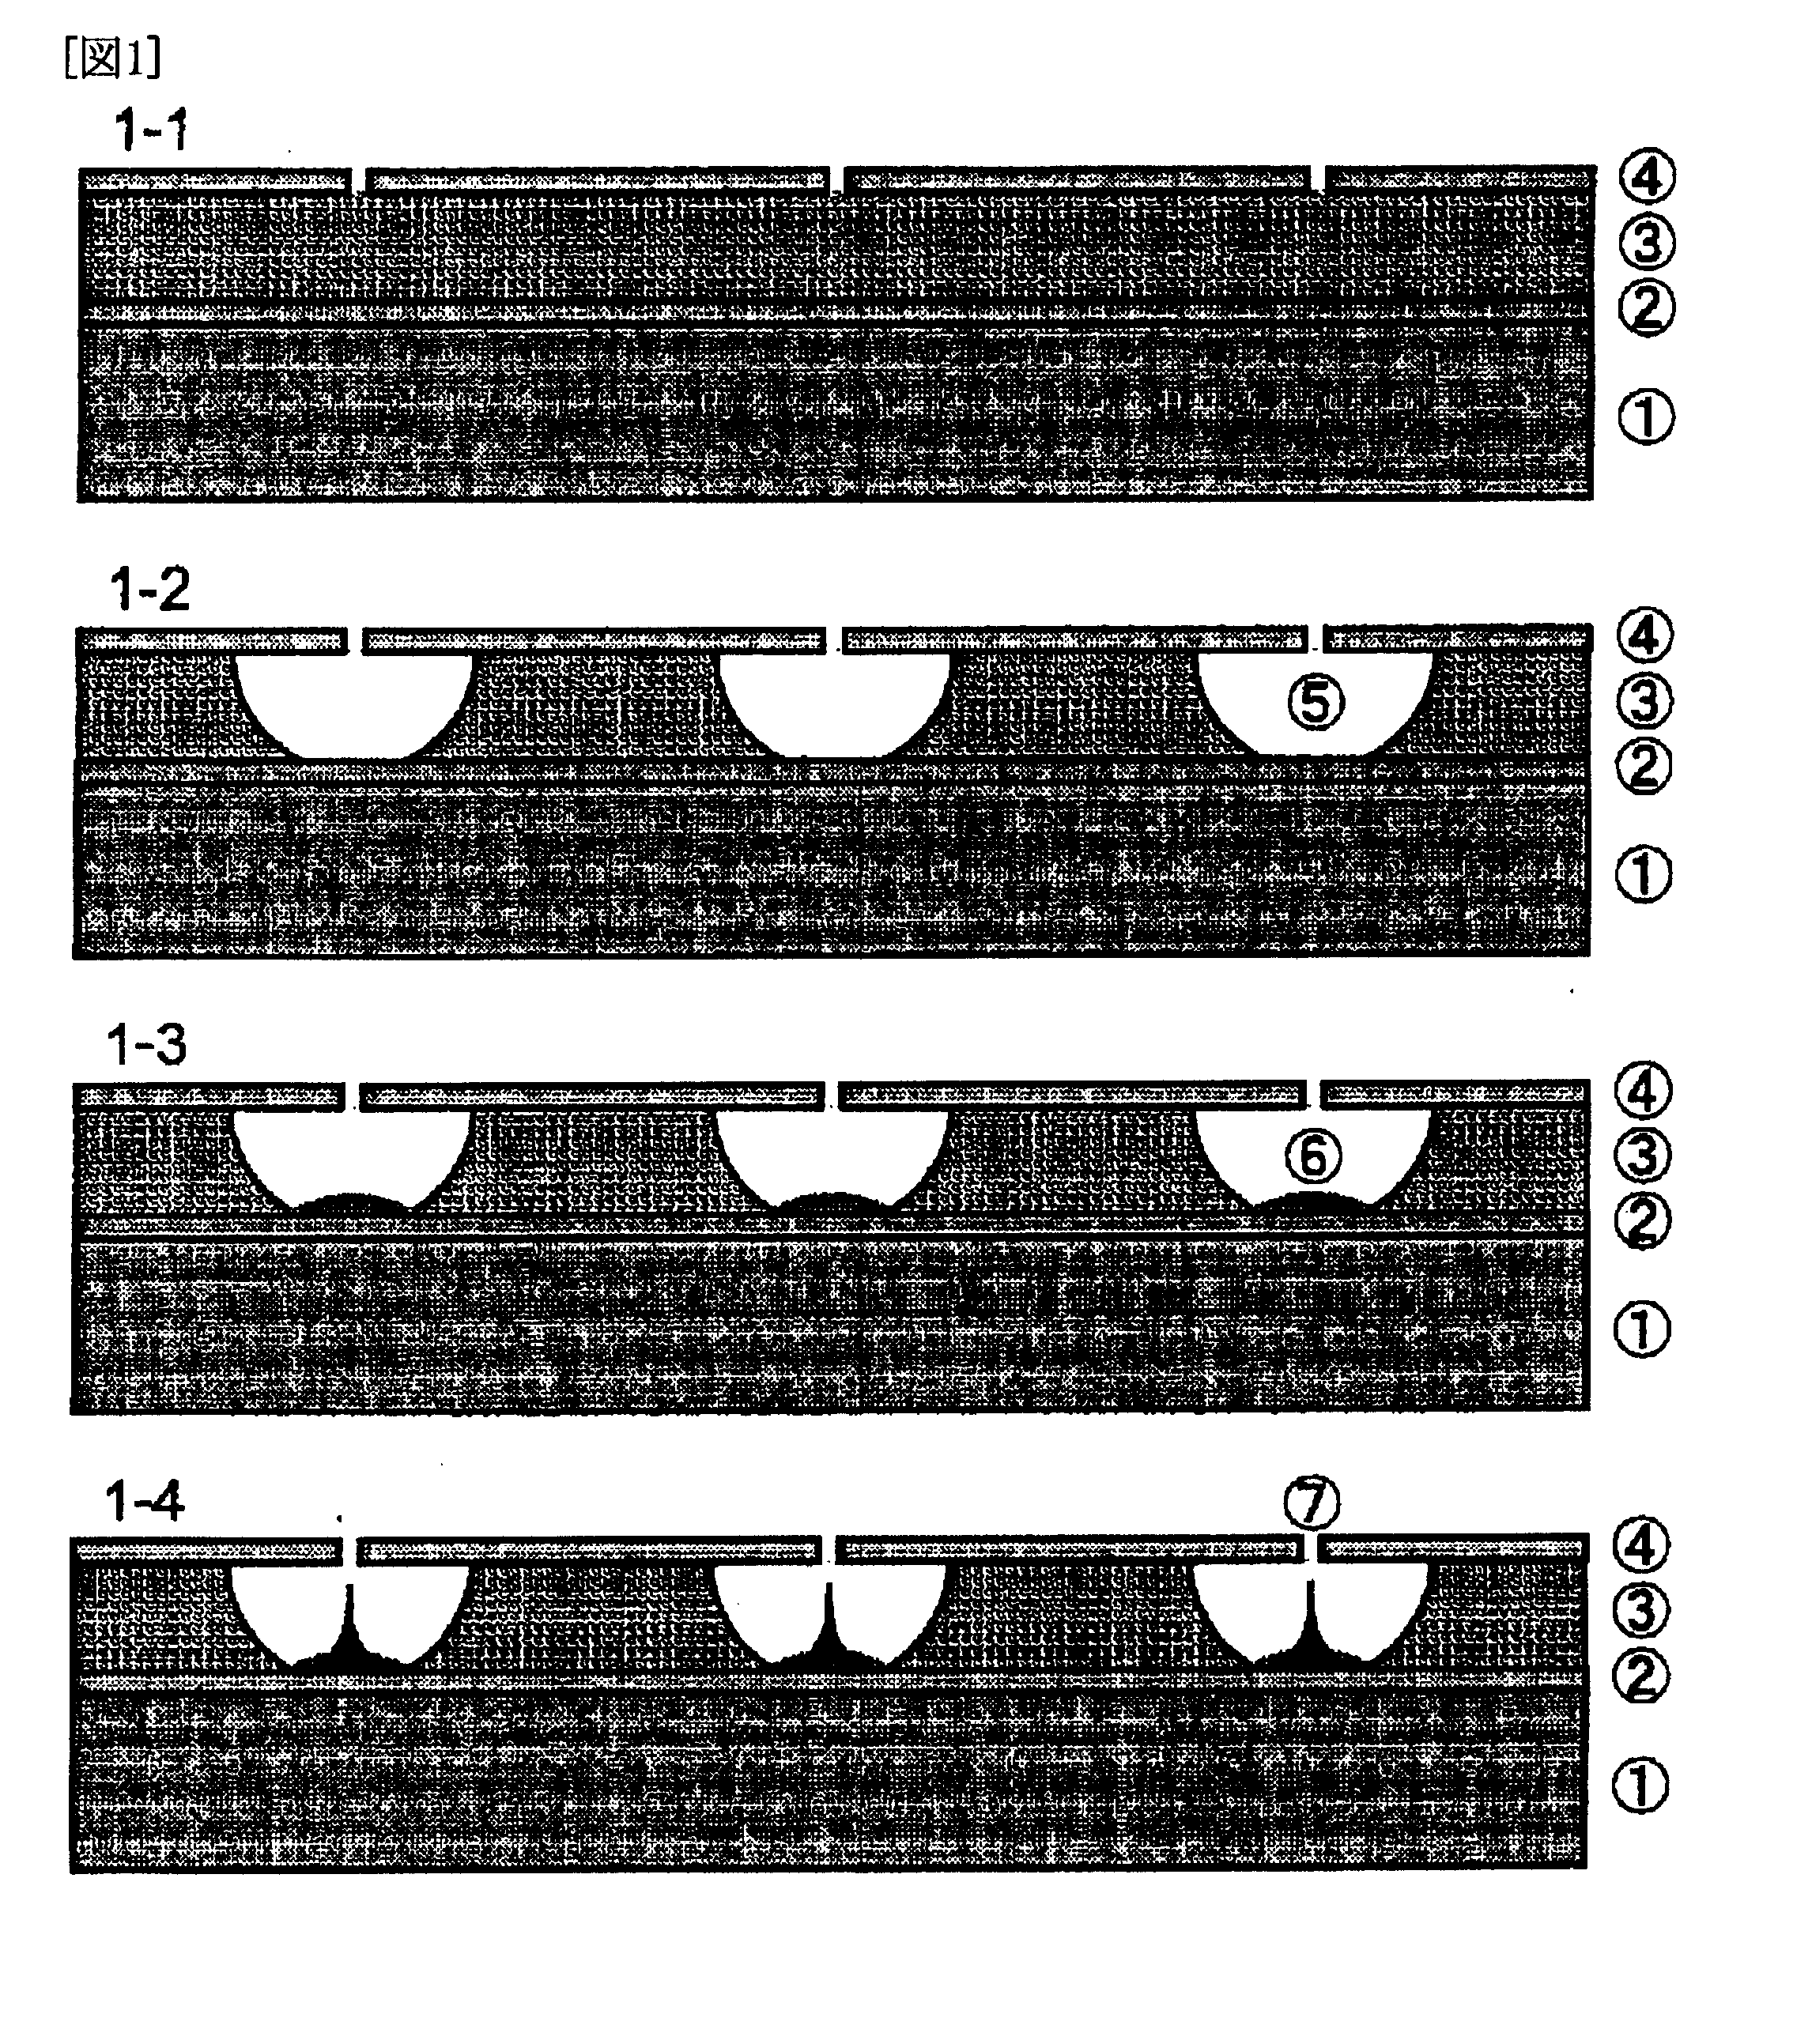 Carbon Nanotube Device and Process for Producing the Same